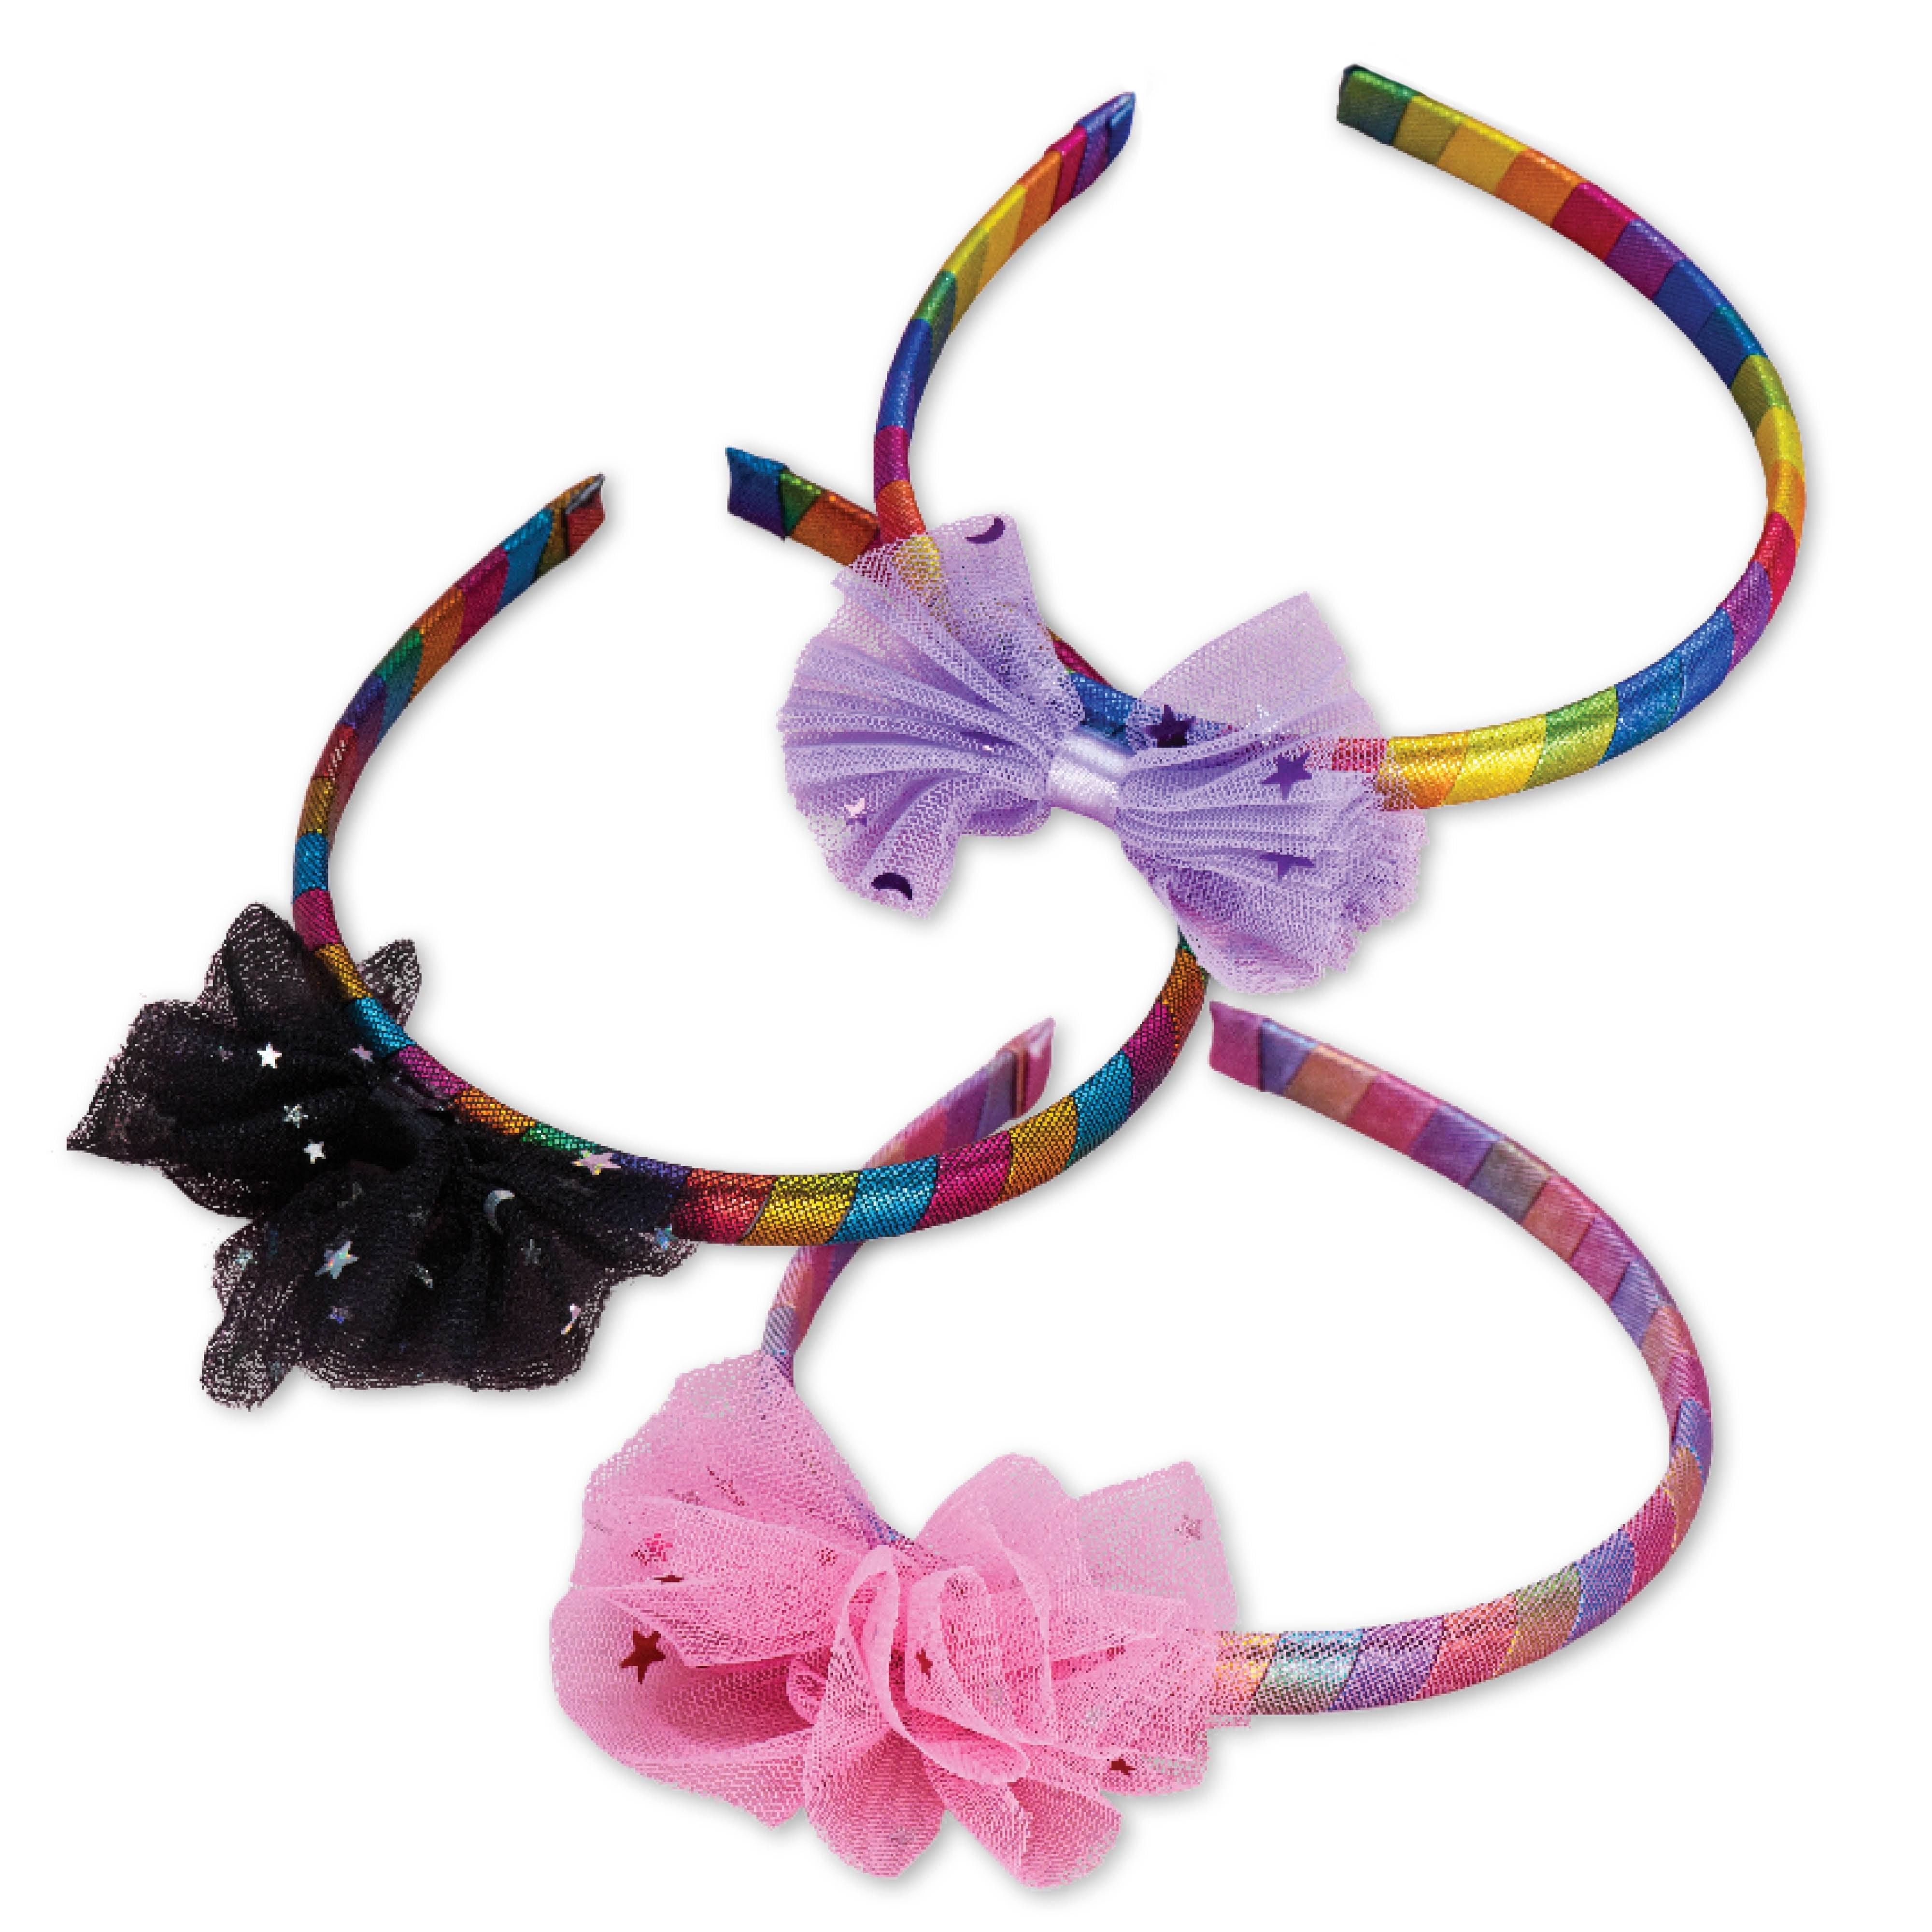 Infinity Head Band Cute Colorful Sparkly Hairband Accessory Striped Rhinestones 